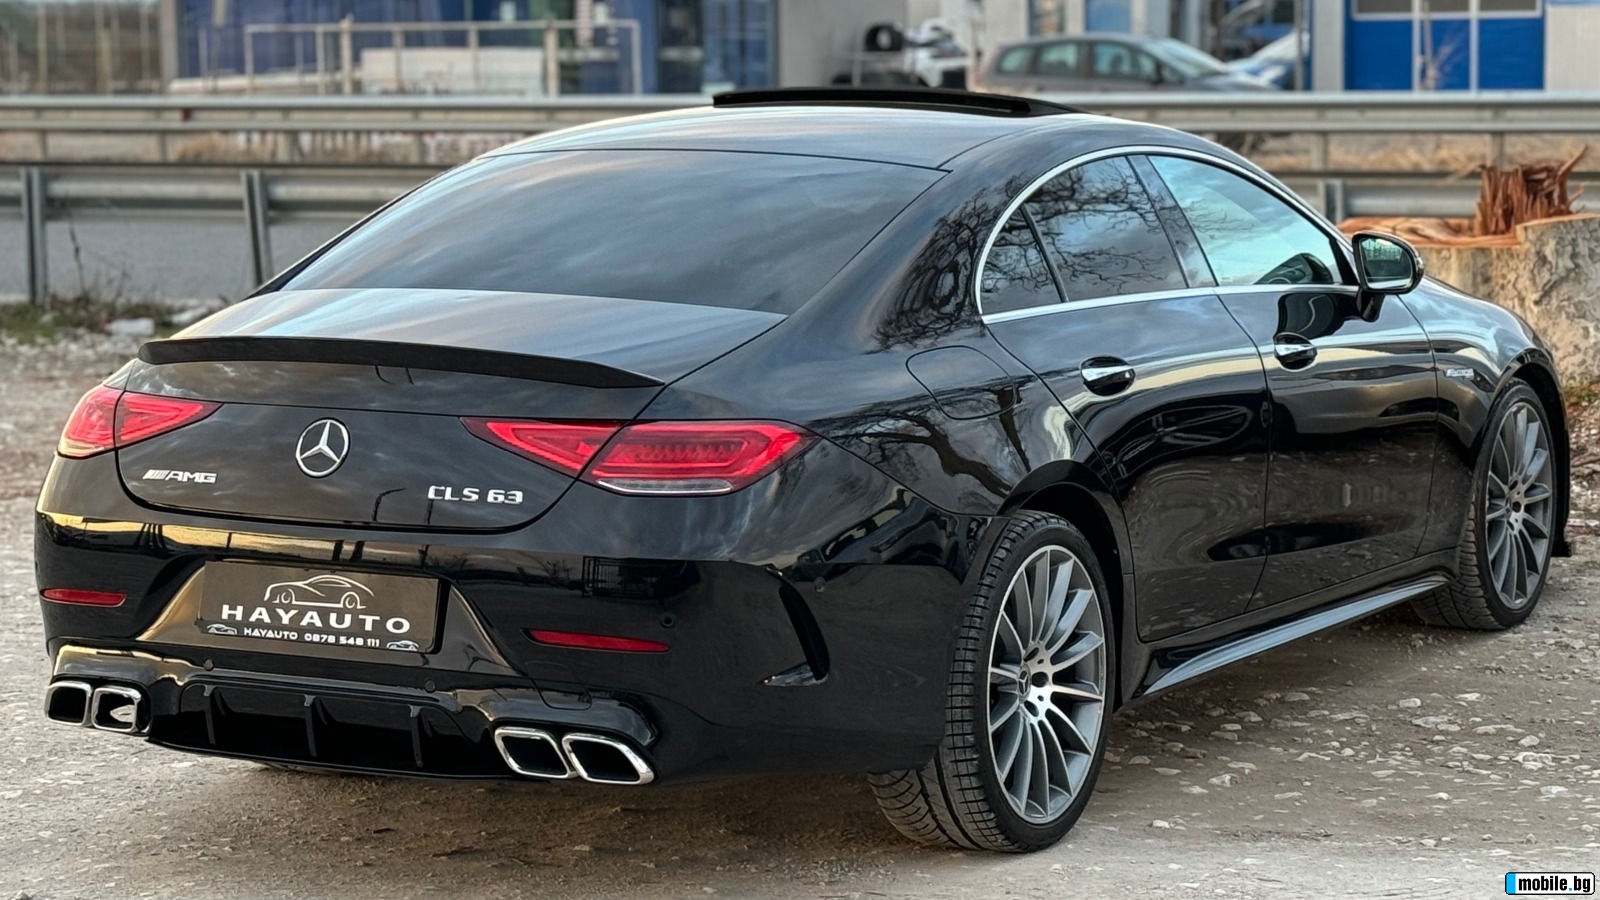 Mercedes-Benz CLS 350 d=4Matic=63 AMG=Edition=Distronic=HUD=Keyless=360* | Mobile.bg   5